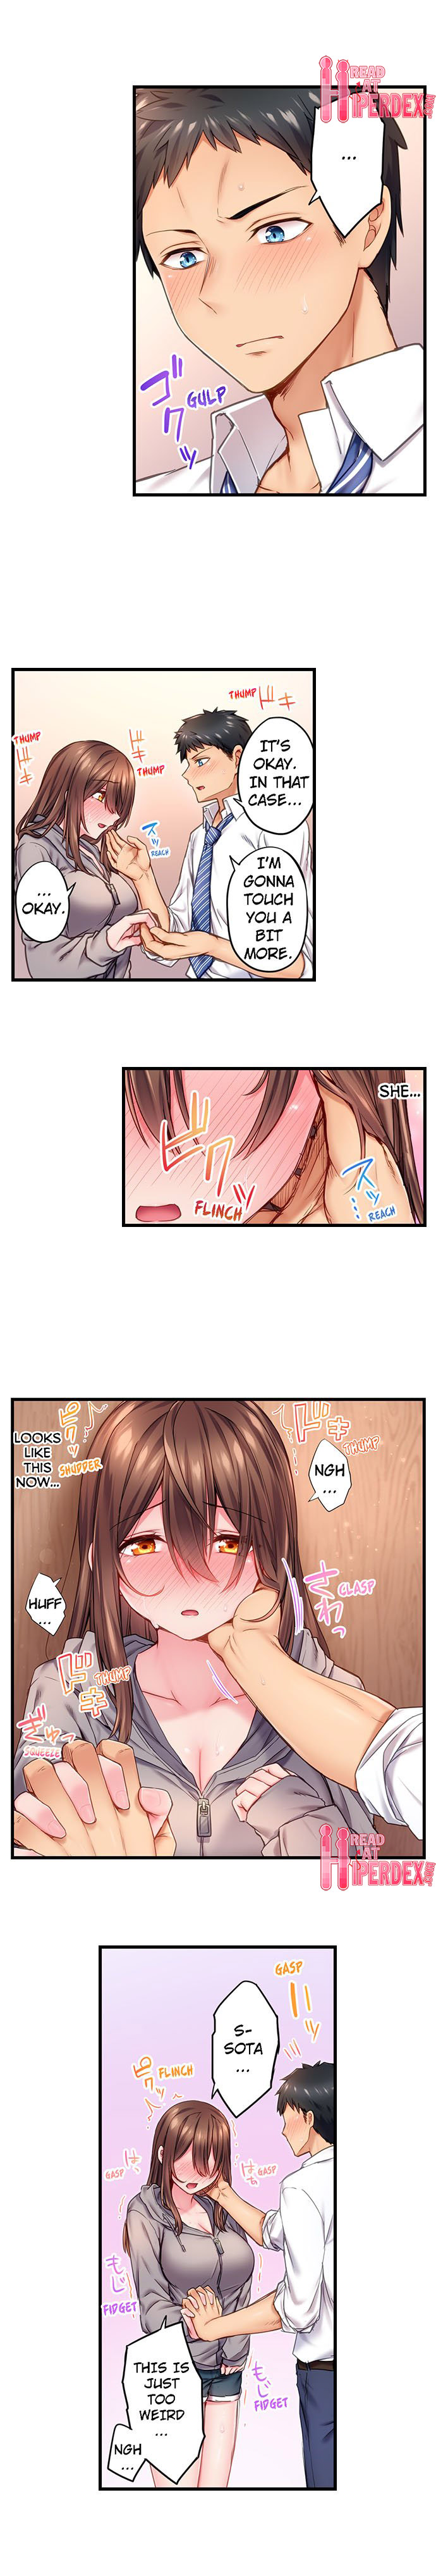 Can’t Believe My Loner Childhood Friend Became This Sexy Girl - Chapter 2 Page 8